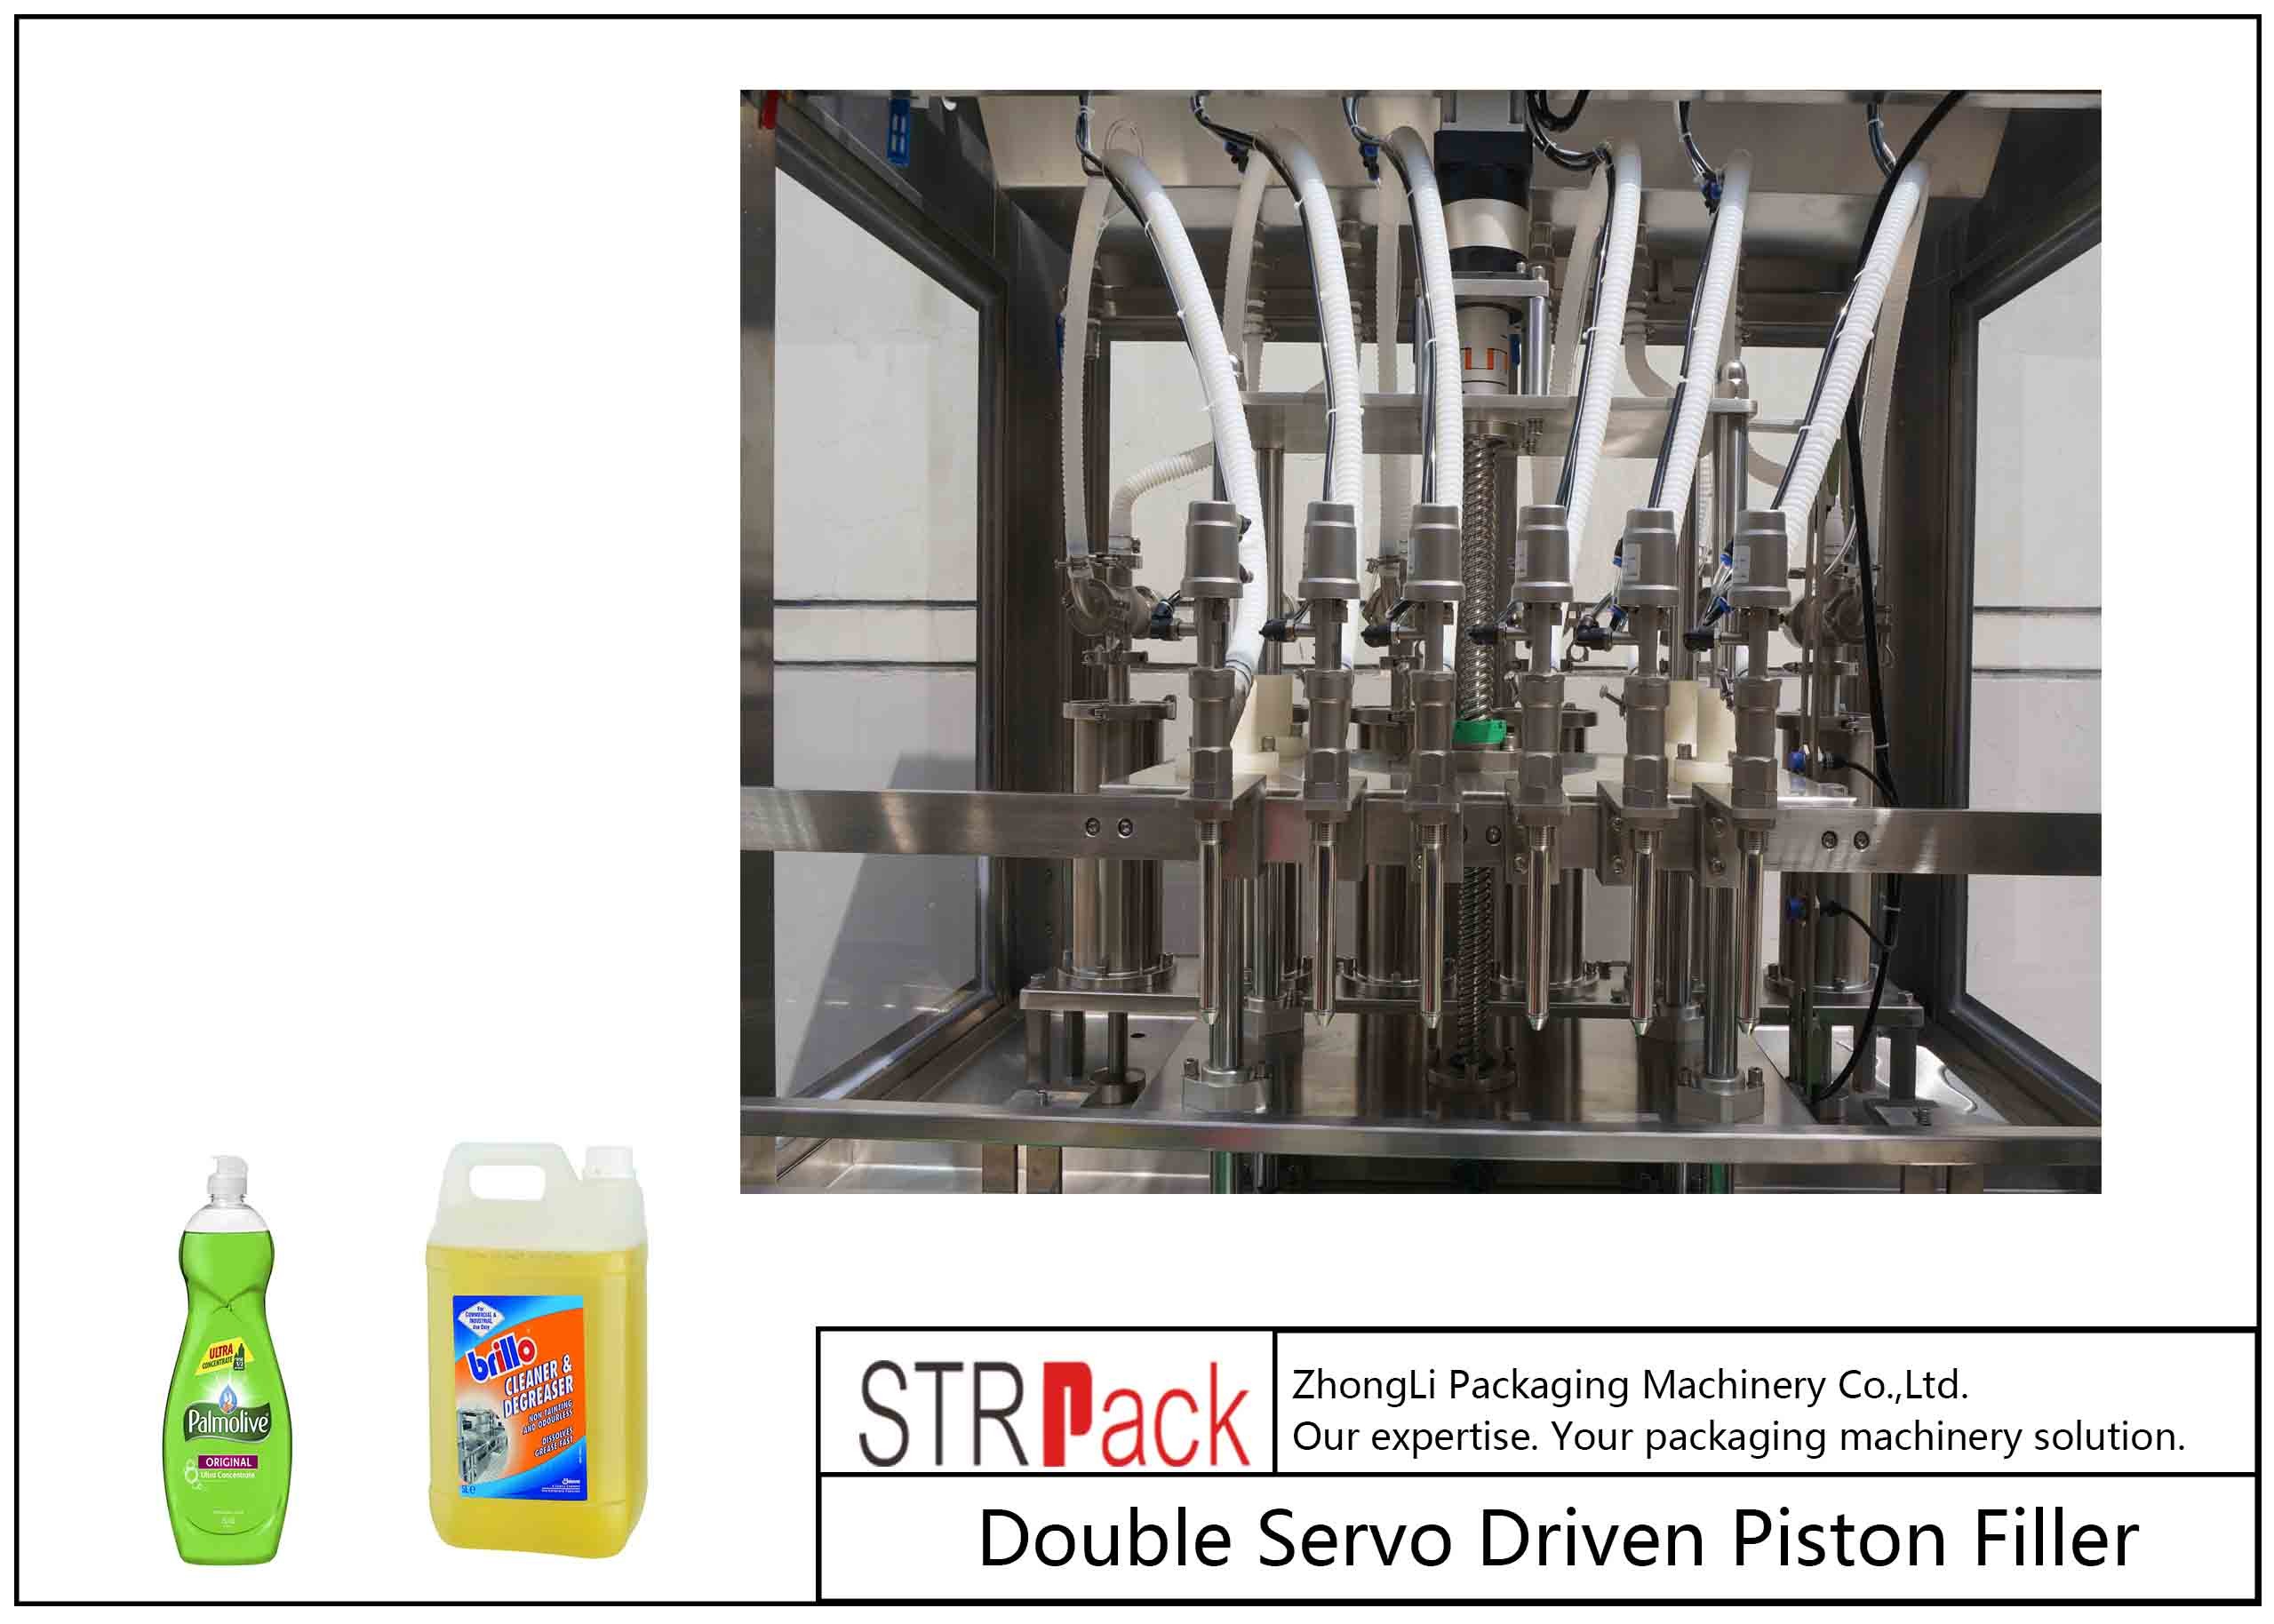 Wholesale Liquid Cleaner Linear 6 Heads Paste Filling Machine Double Servo Driven from china suppliers